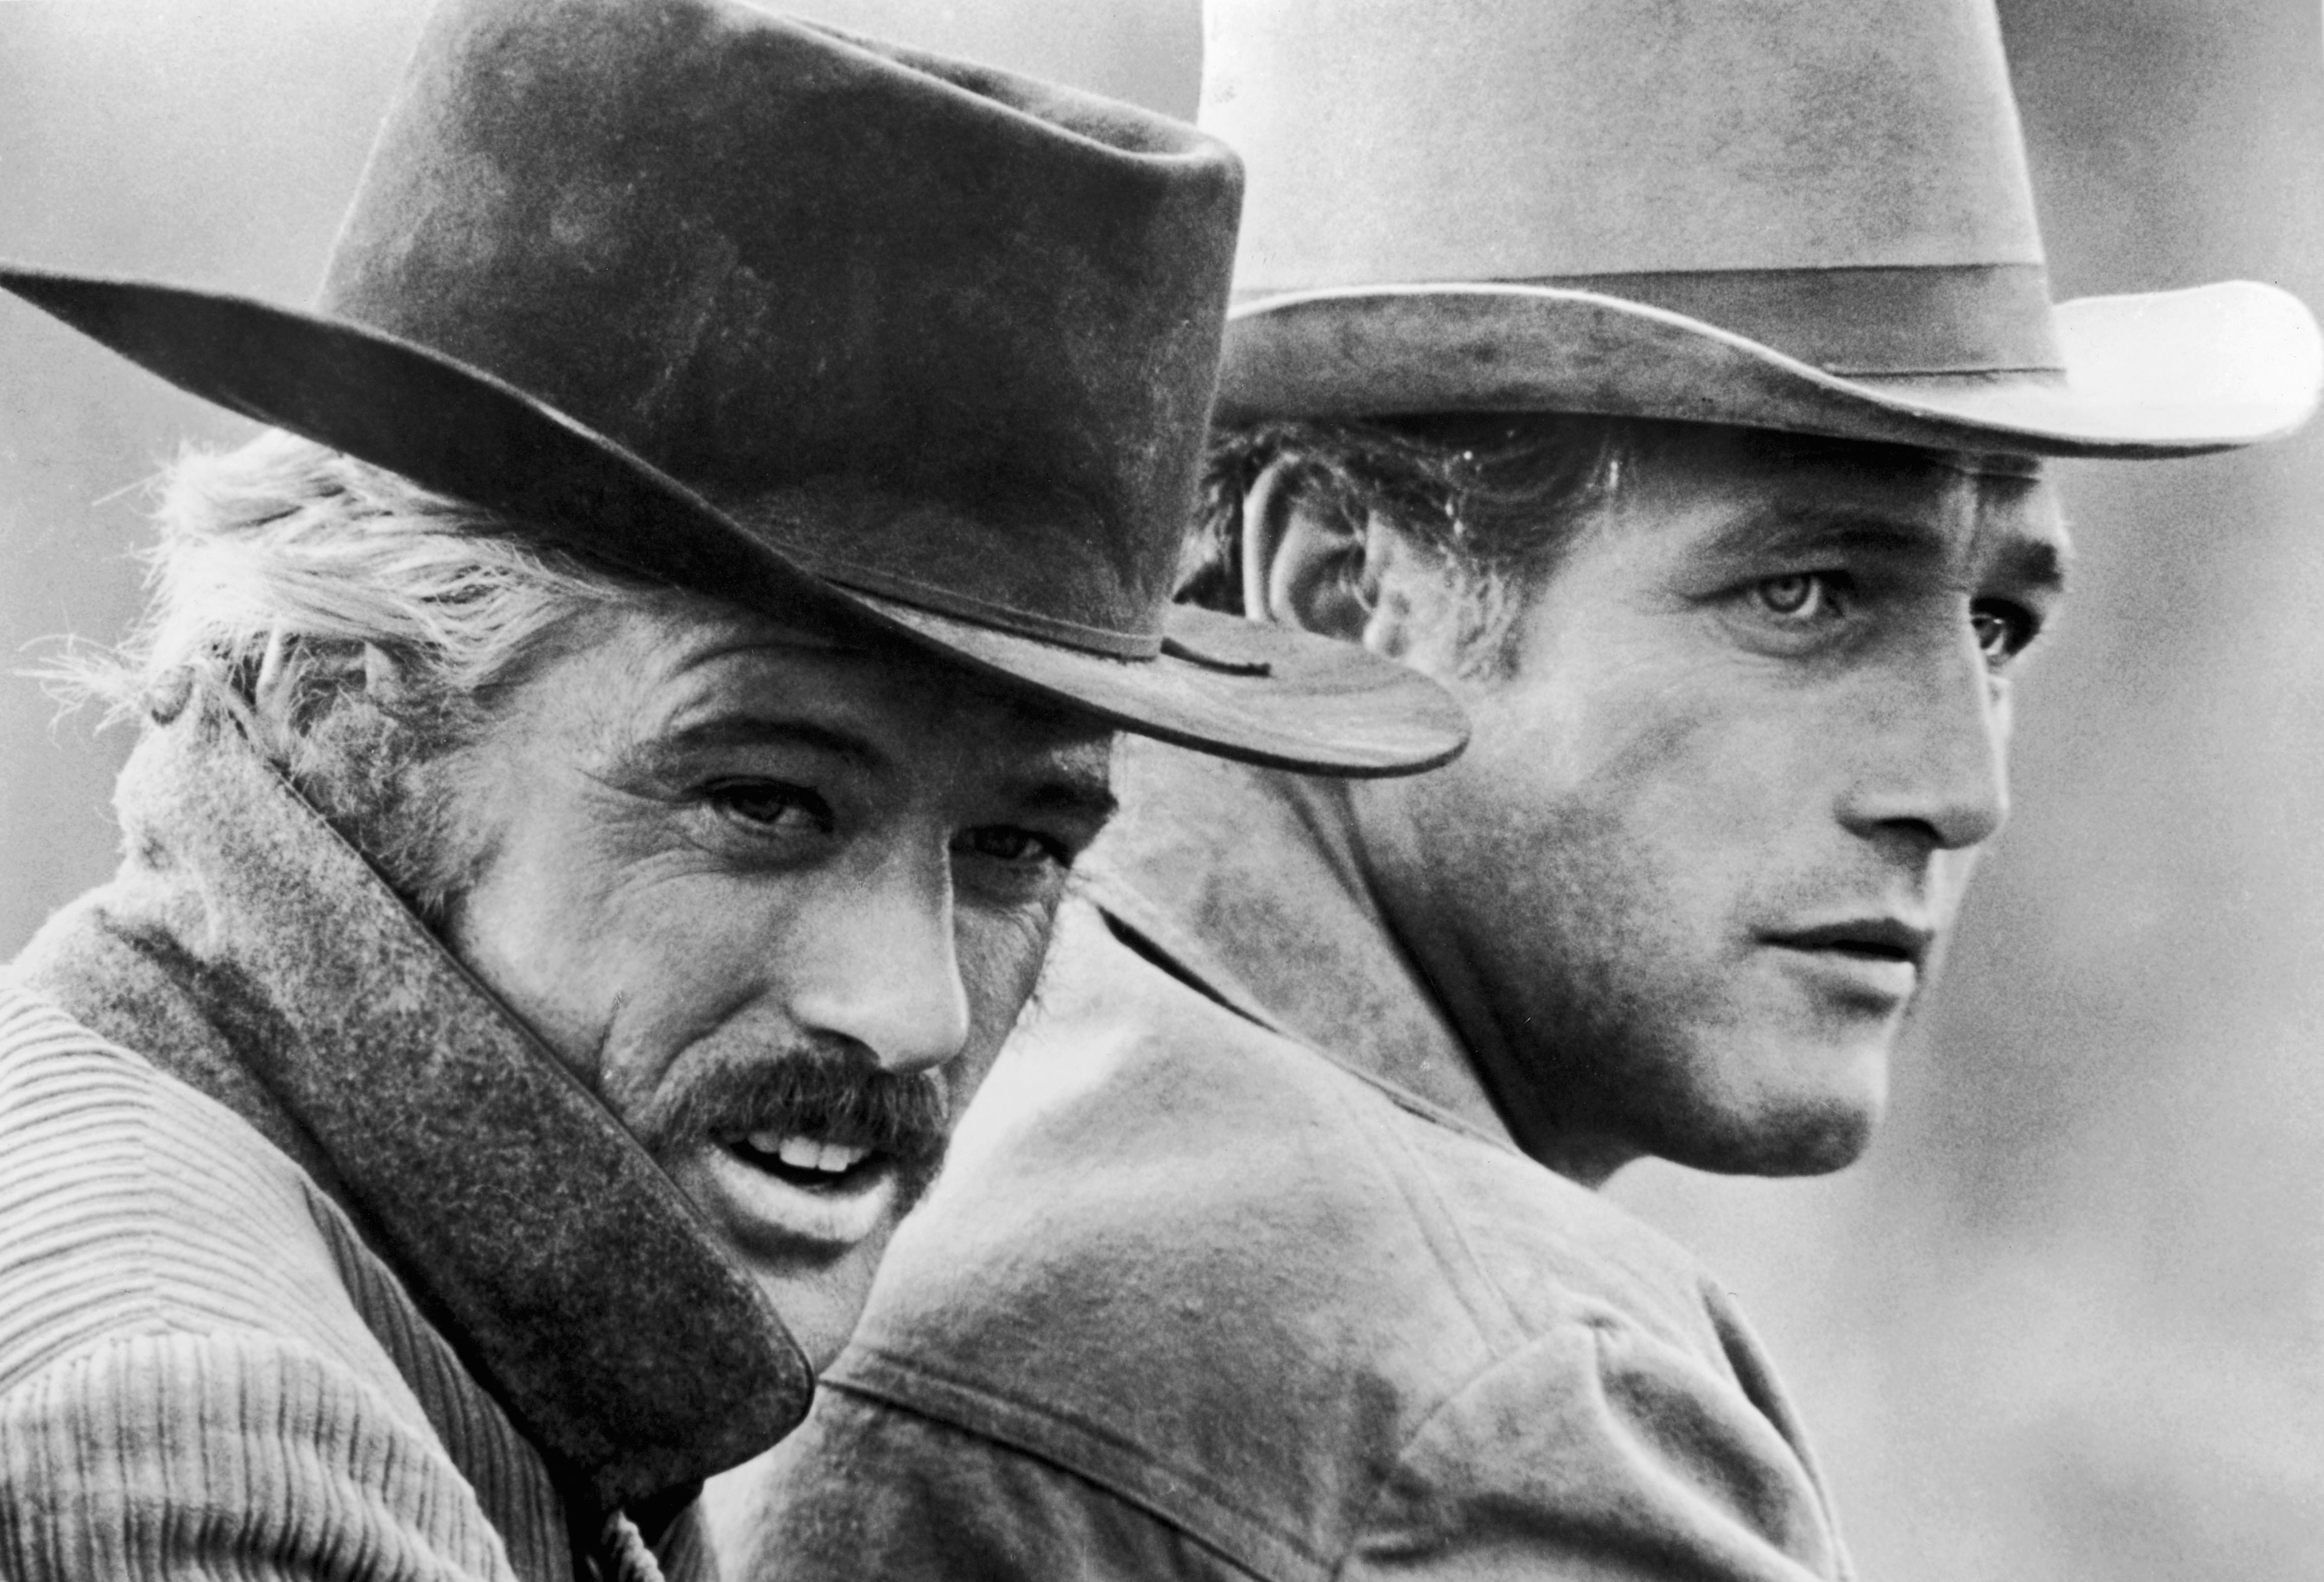 Butch Cassidy and the Sundance Kid returns to the big screen in HD at The Ridgefield Playhouse January 17